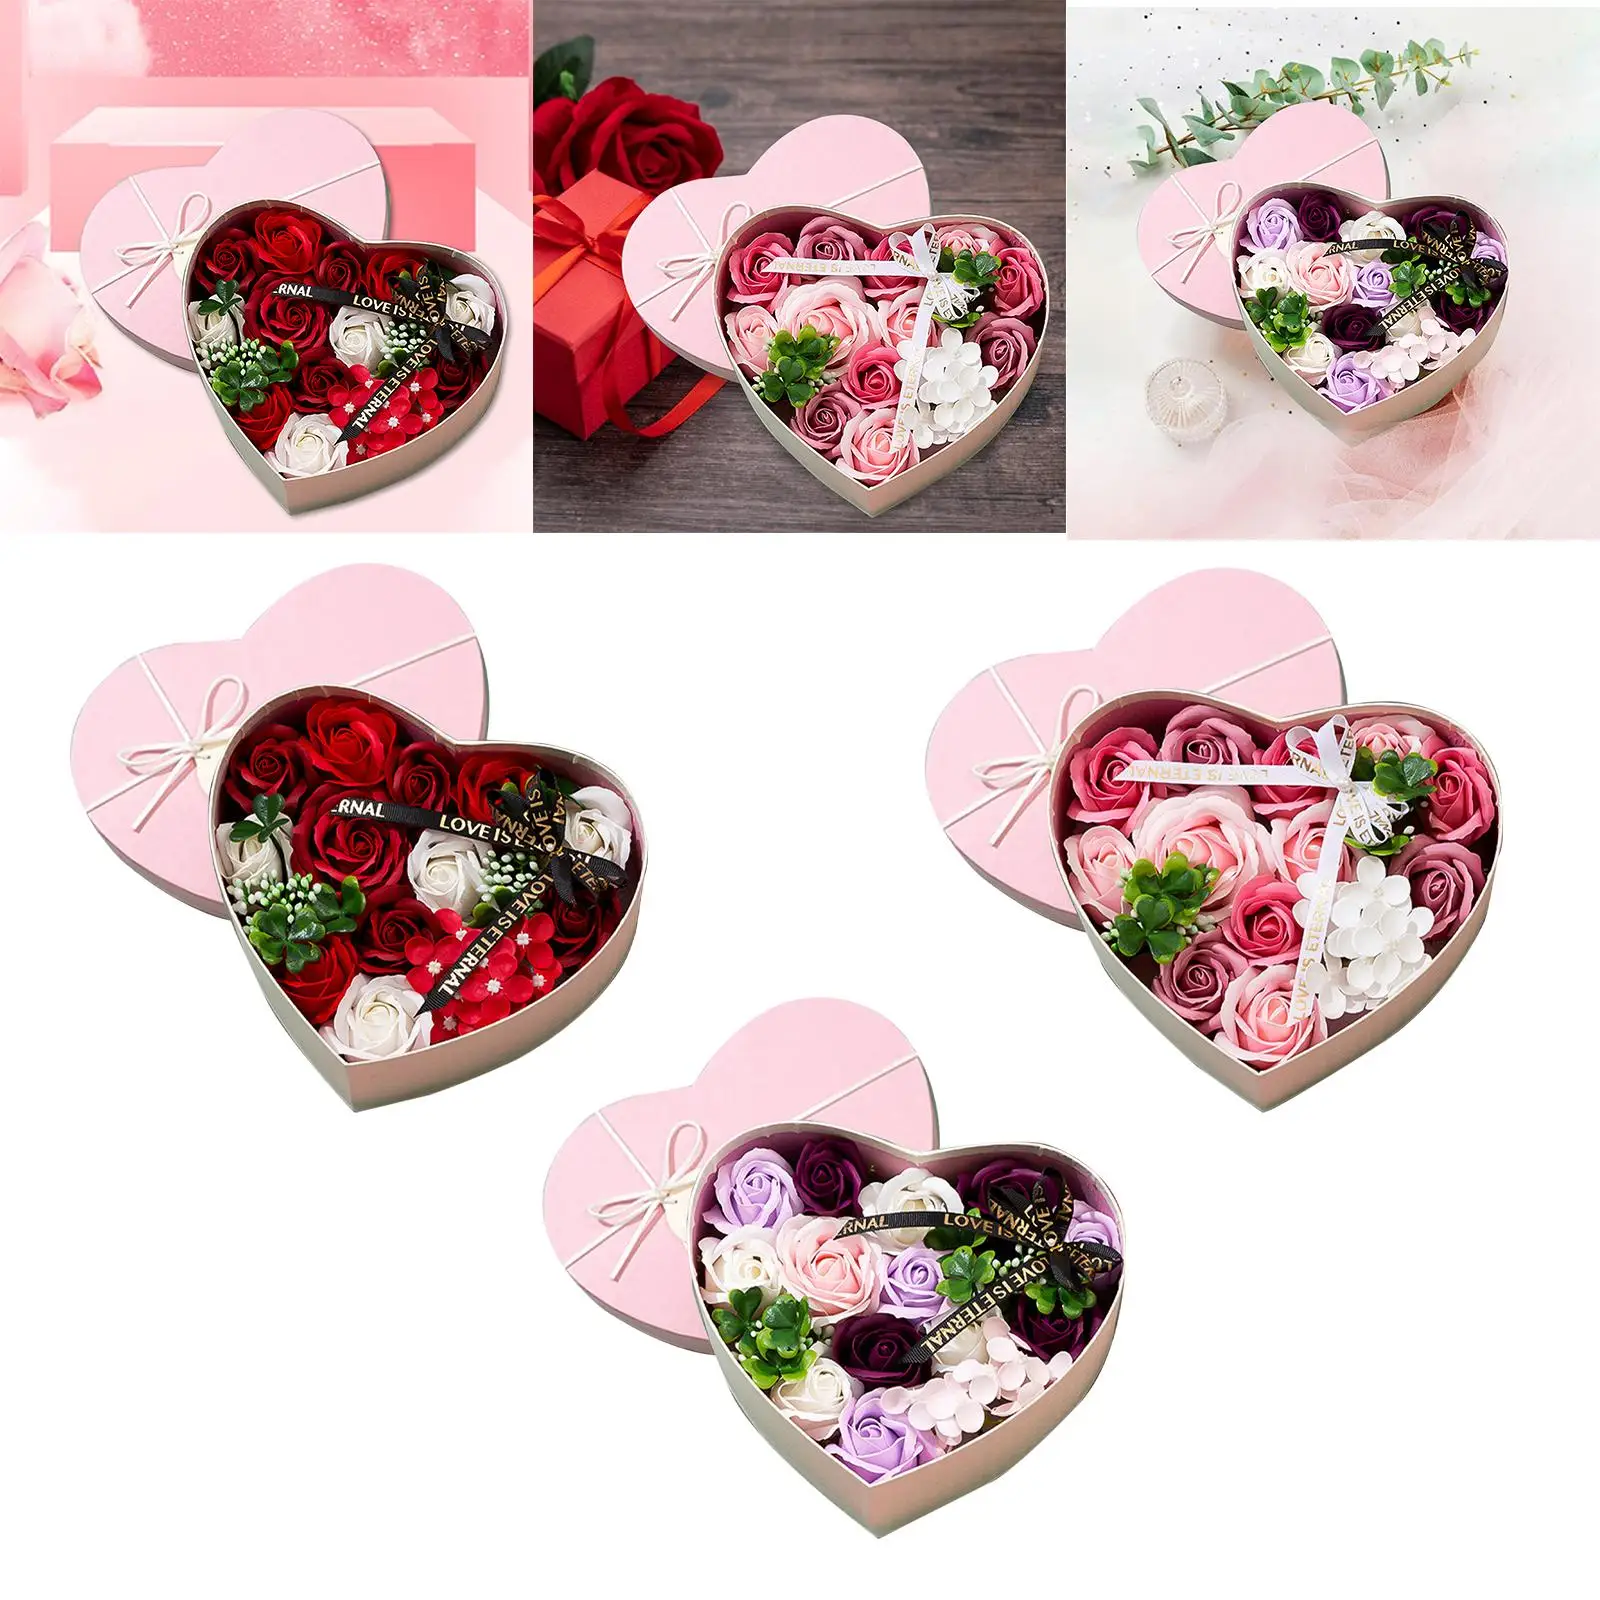 Rose Soap Flowers Bouquet Valentines Day Decor for Mother`s Day Anniversary